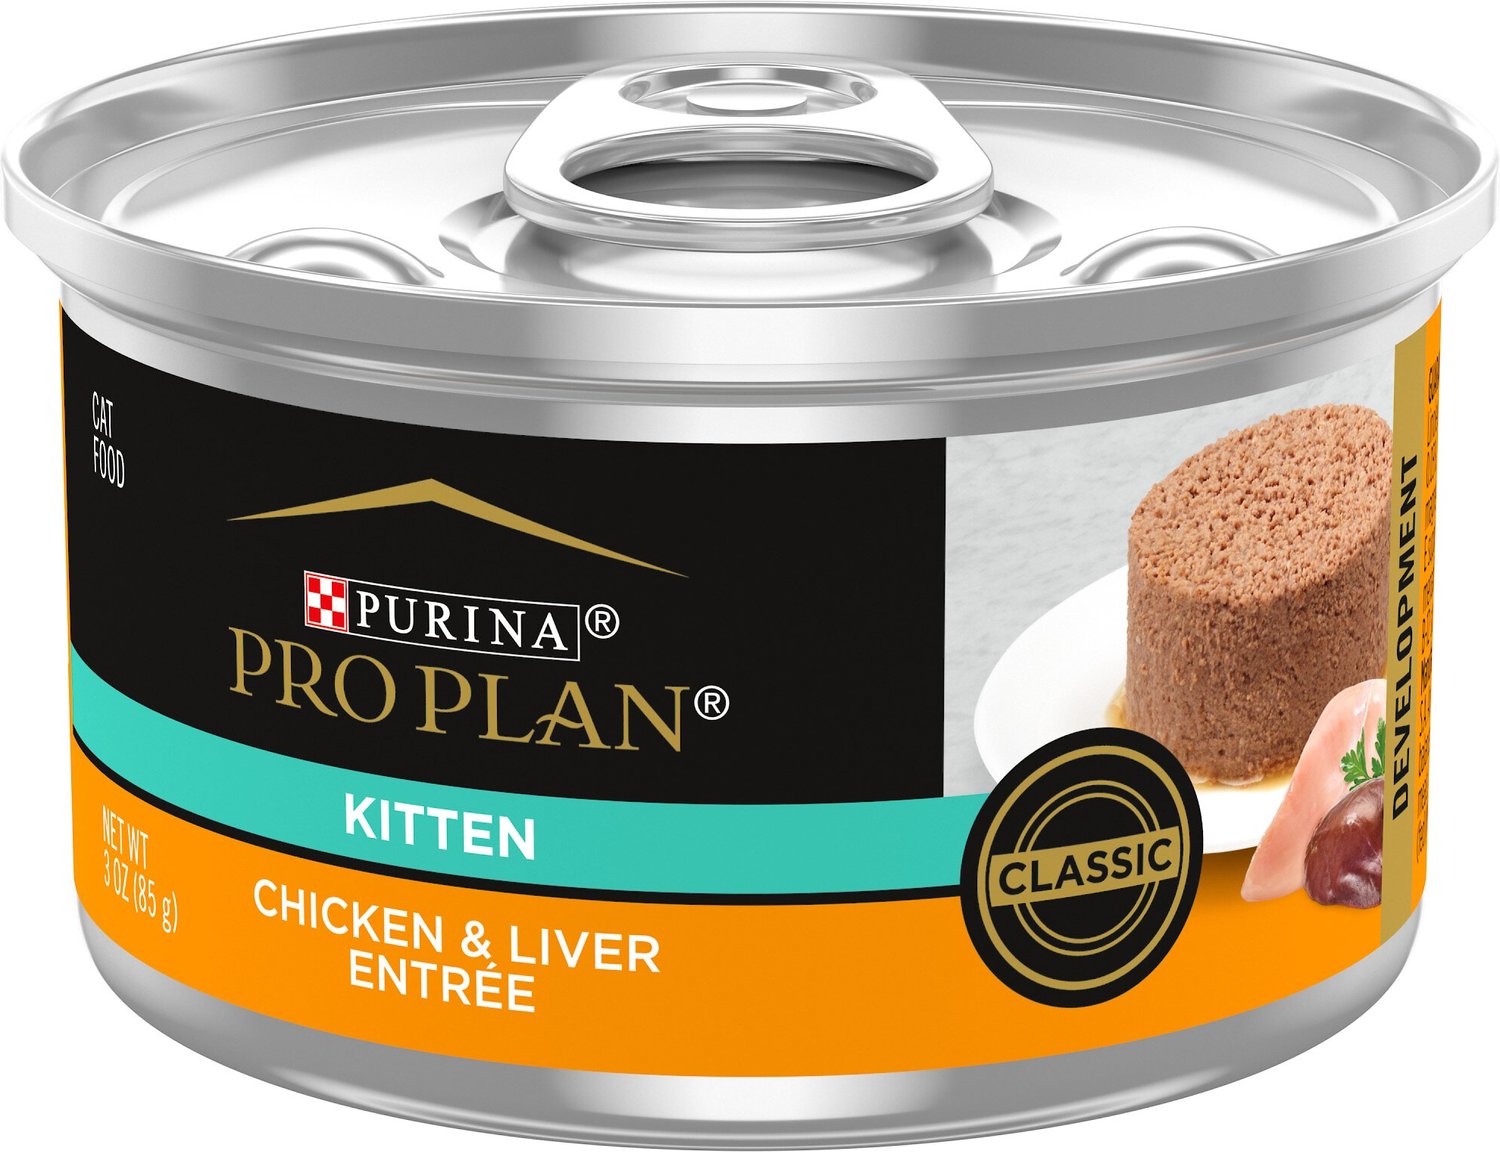 Oceano vaquero desinfectar PURINA PRO PLAN Kitten Classic Chicken & Liver Entree Canned Cat Food, 3-oz,  case of 24 - Chewy.com